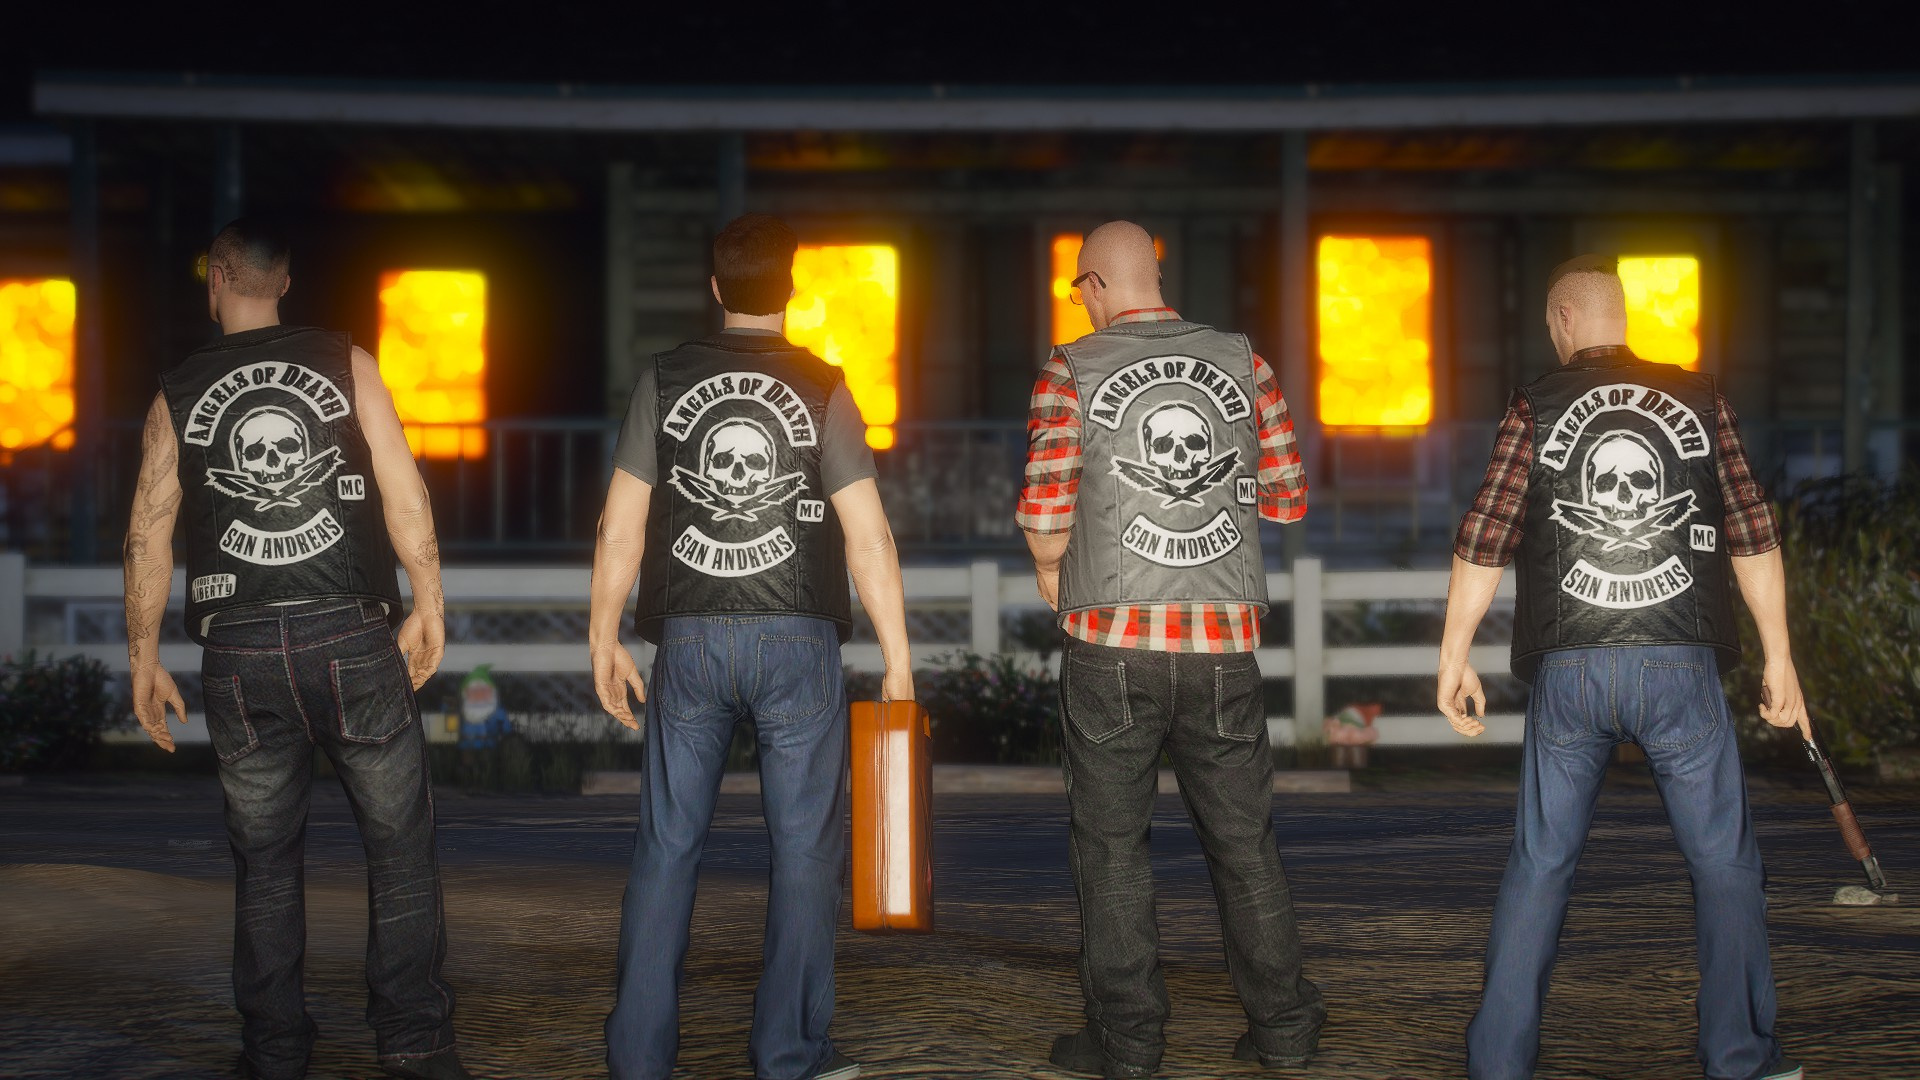 Lost Mc And Angels Of Death Biker Vests Gta5 | Images and Photos finder